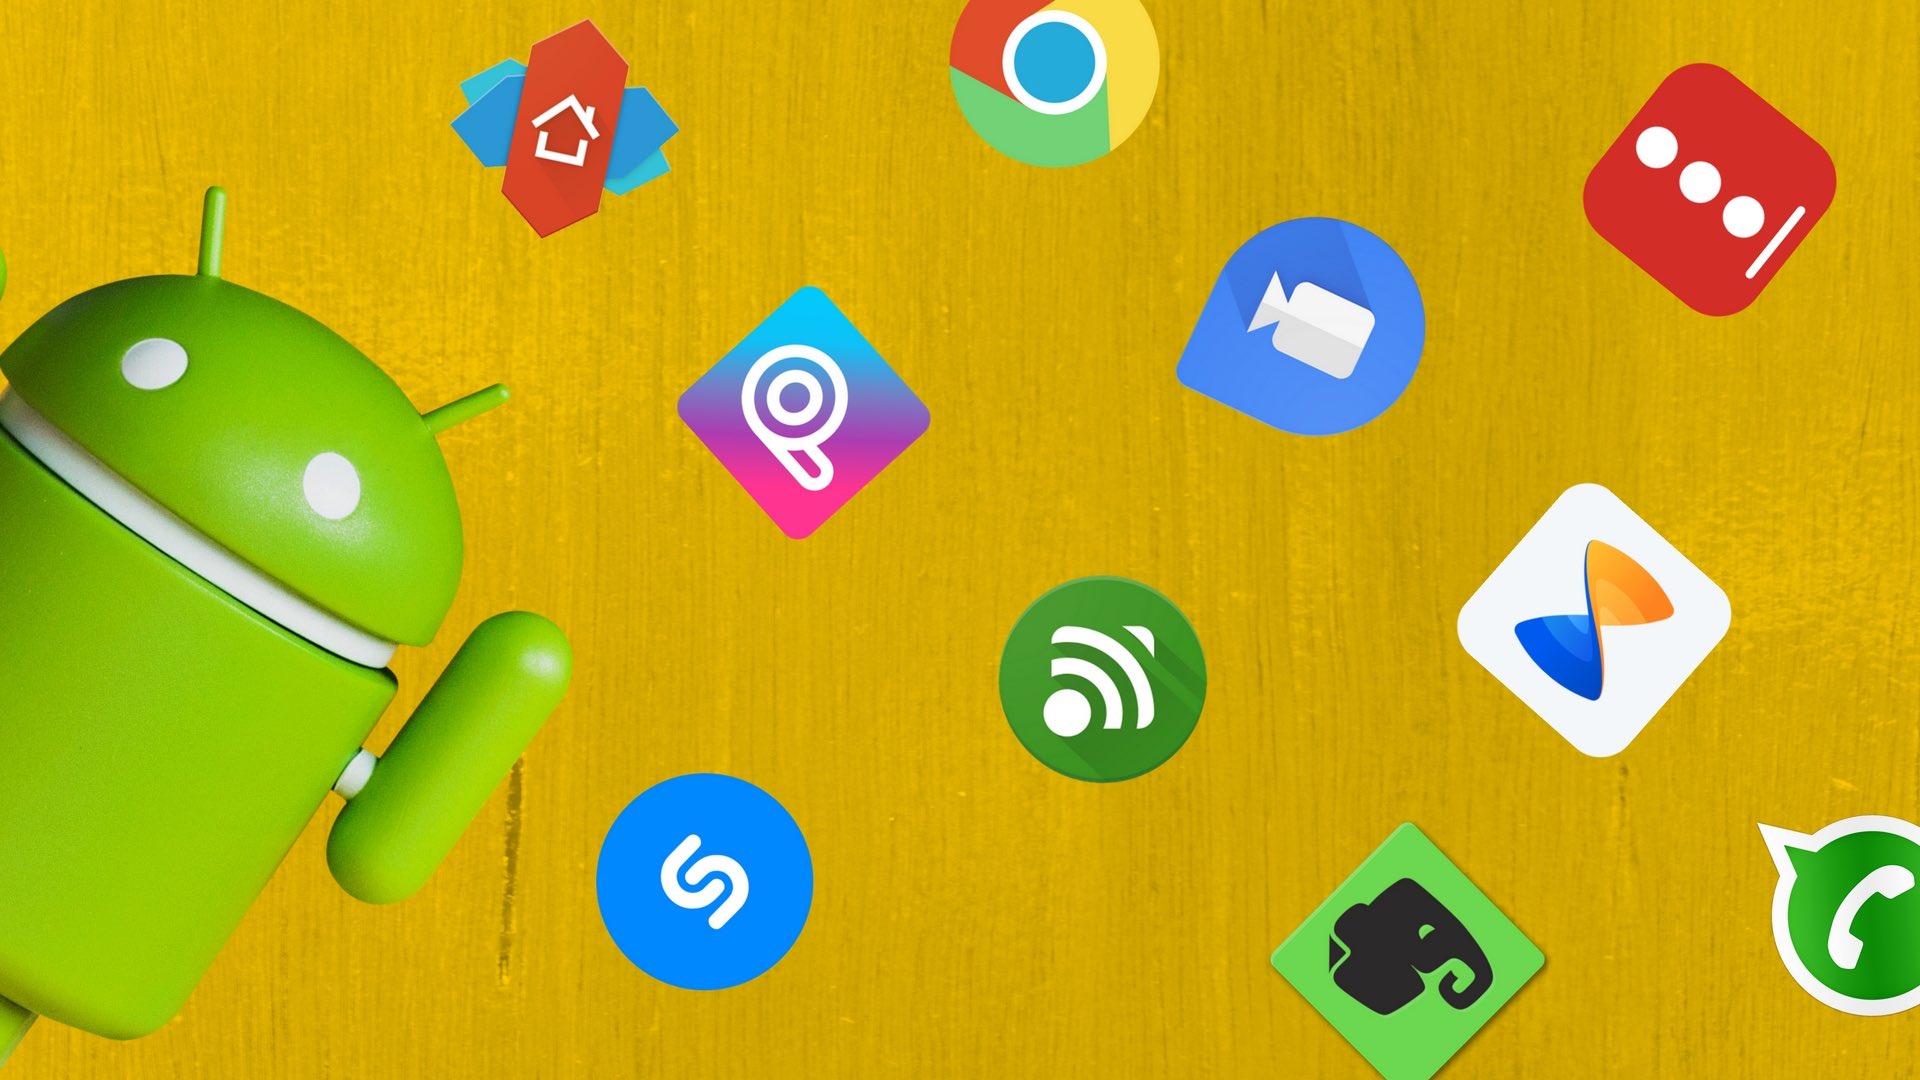 Best Android Apps 2019